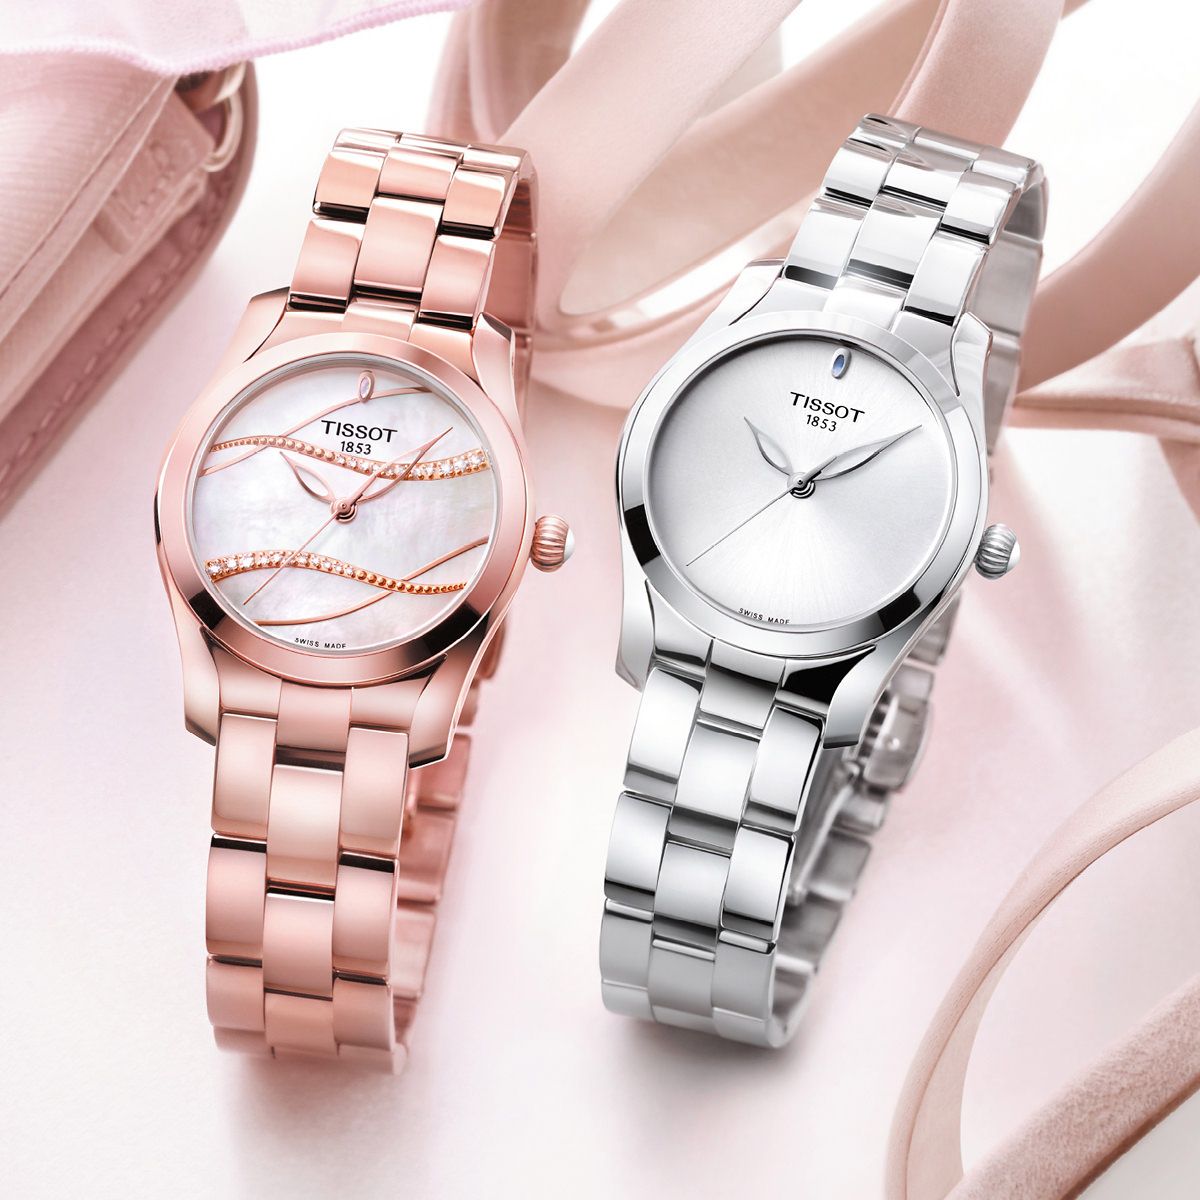 Best of Baselworld 2017 – Top15 New Launches for Women Post-21